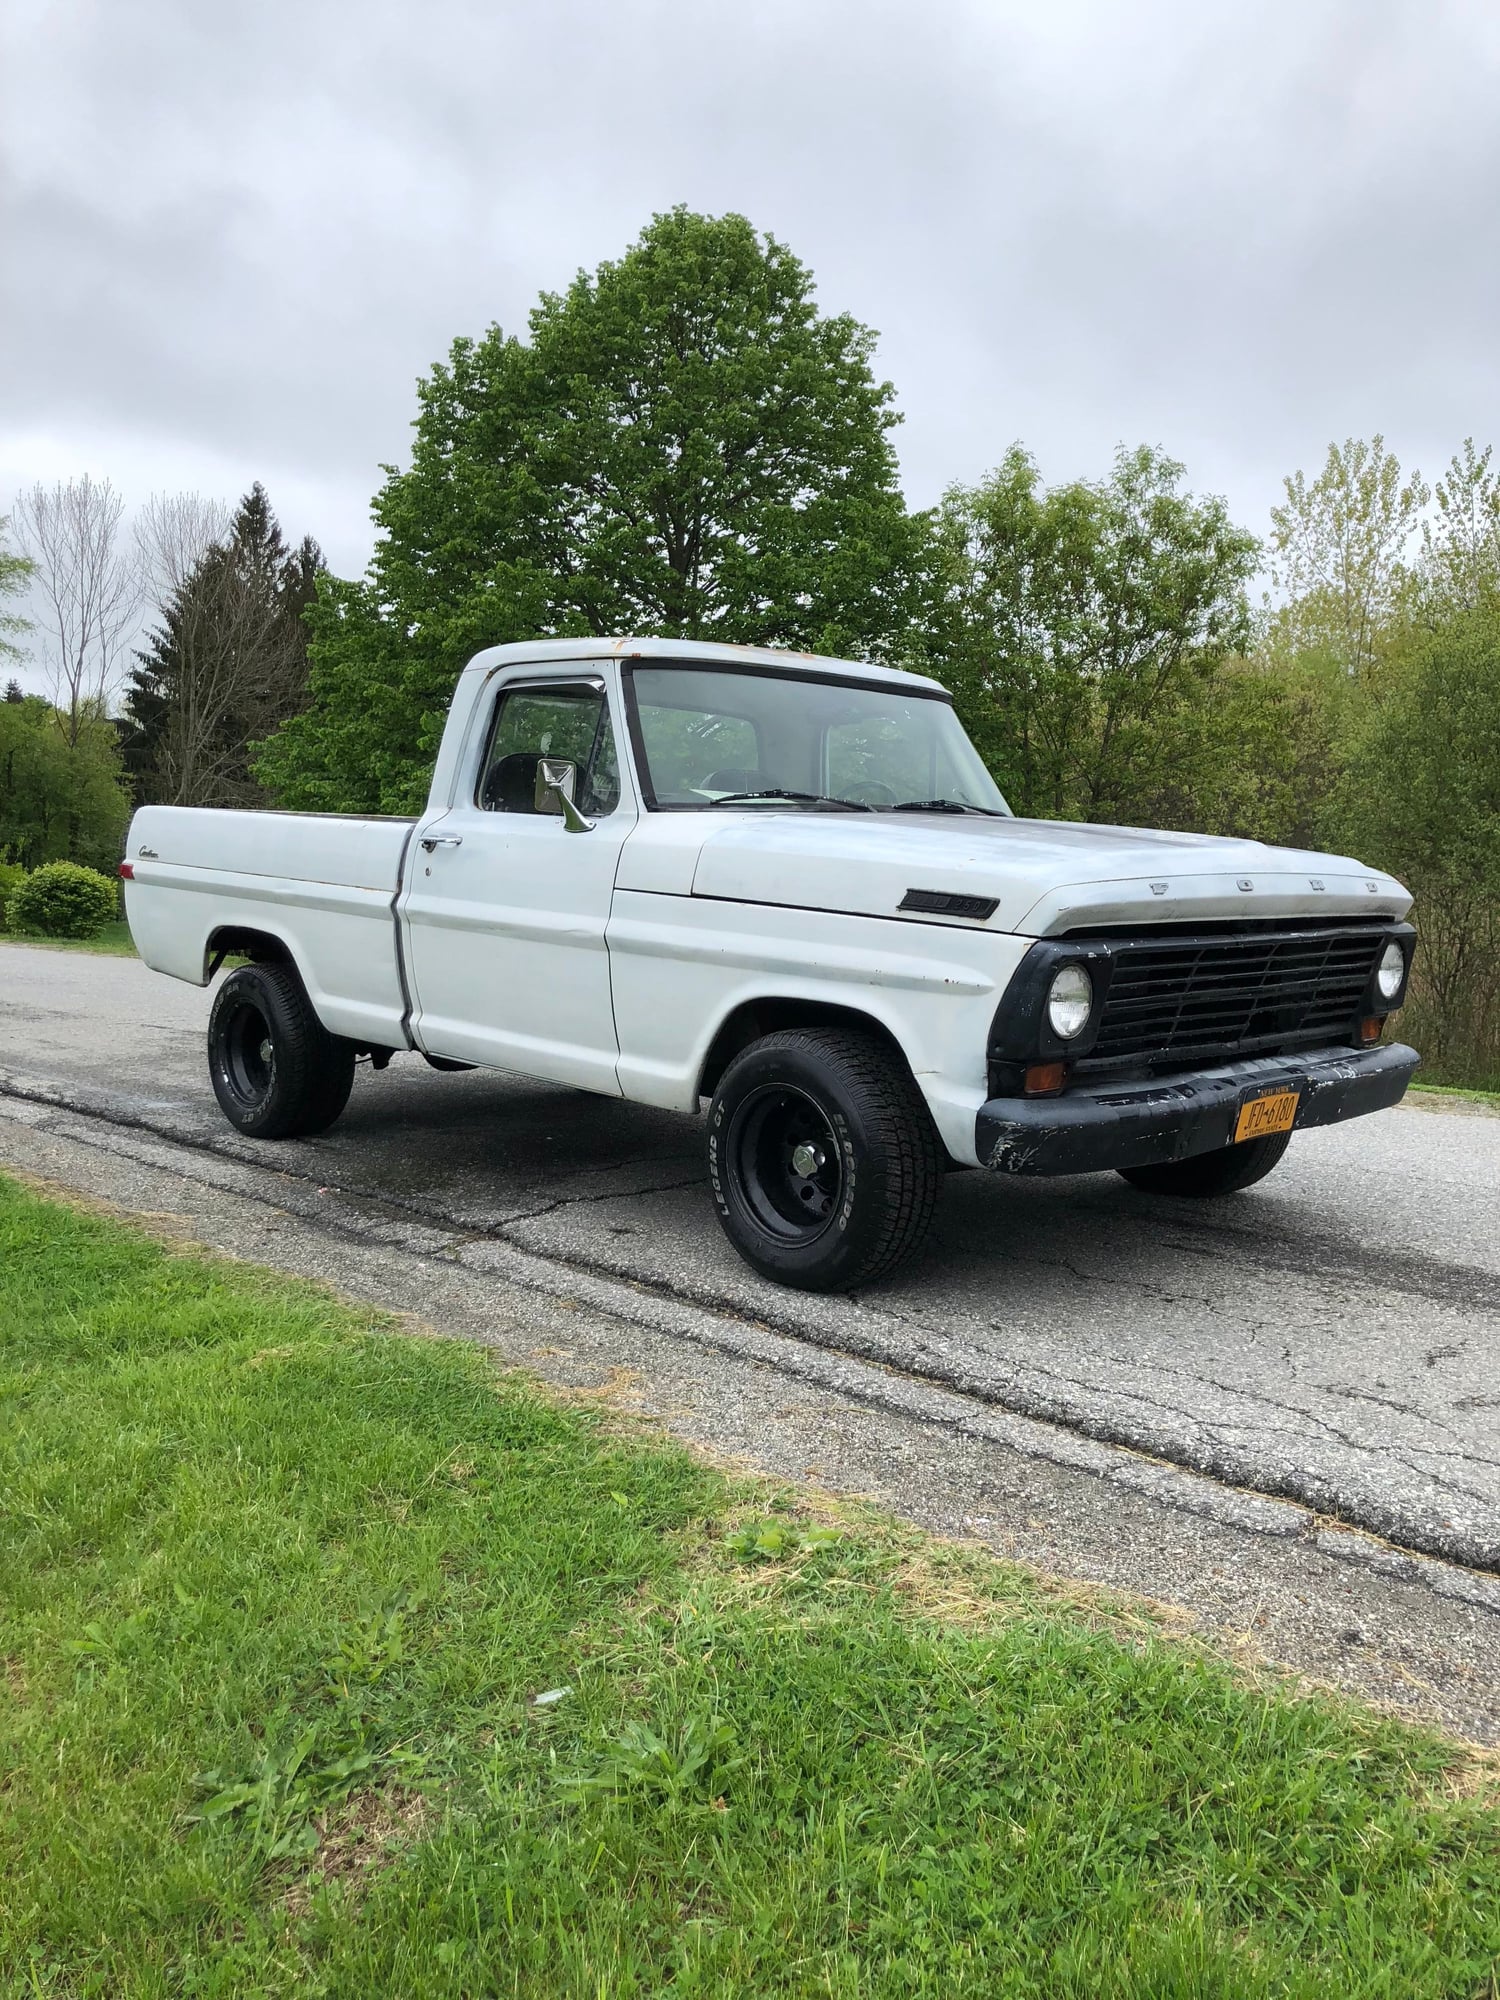 1969 Ford F-100 - 1969 Ford F100 Short Bed - Used - VIN F10YRF97438 - 100,000 Miles - 8 cyl - 2WD - Automatic - Truck - White - Pawling, NY 12564, United States